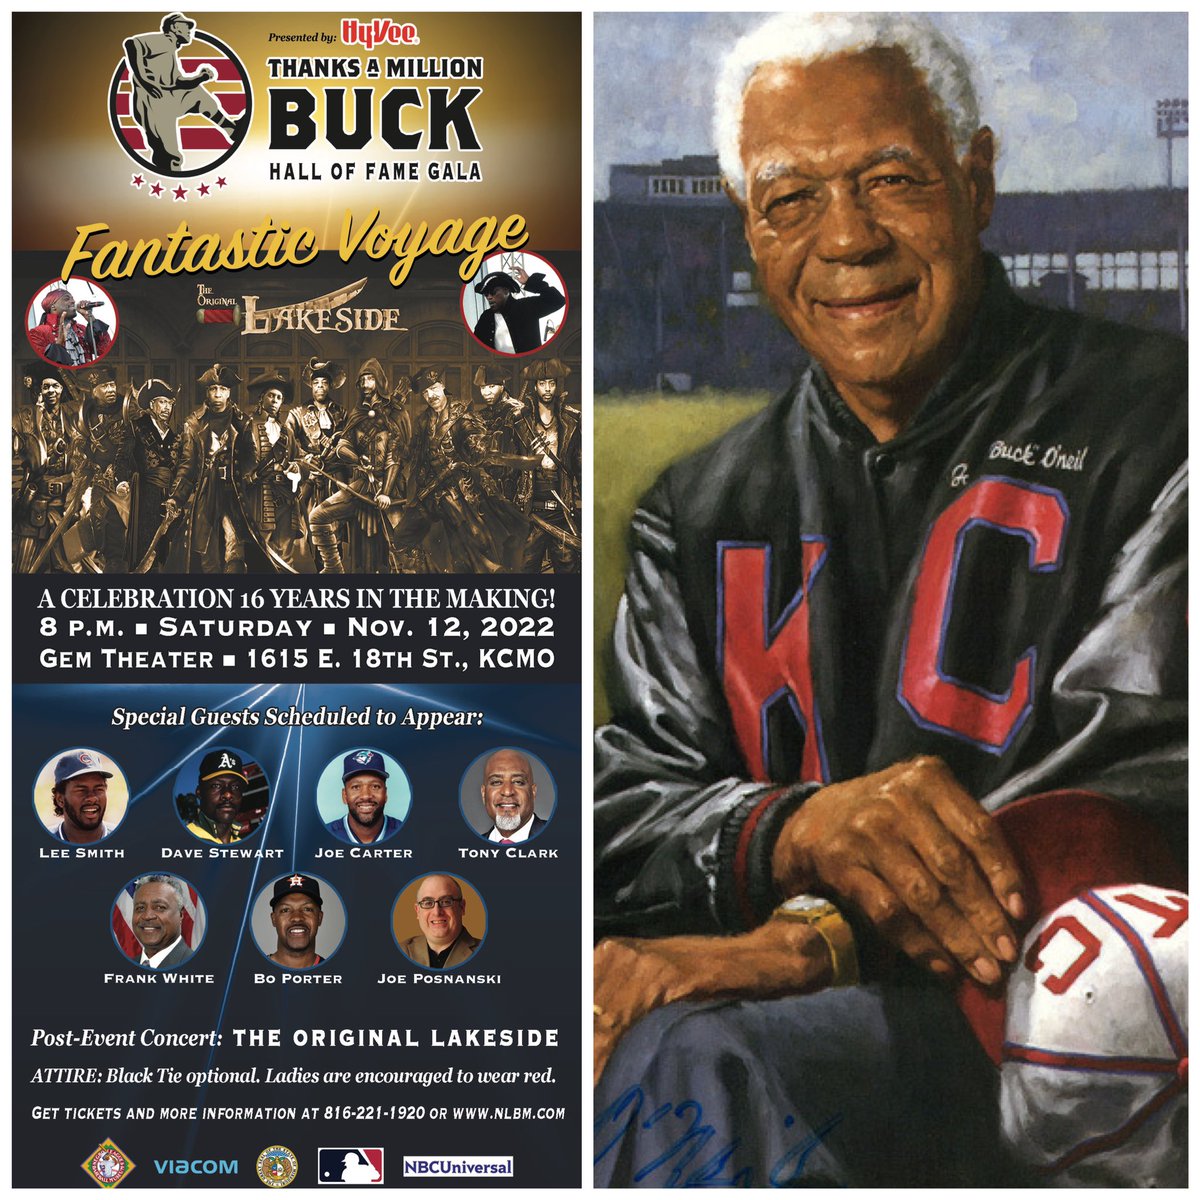 Don’t miss the “Thanks A Million, Buck” Hall of Fame Gala presented by @HyVee, 8 pm, 11/12/22, Gem Theater! Special guests include: Lee Smith, @Dsmoke34, @JoeCarter_29, @Kenny_Lofton7, @JCEFrankWhite, Tony Clark, @Boporter16Bo, @JPosnanski & more! Tixs at NLBM.com.